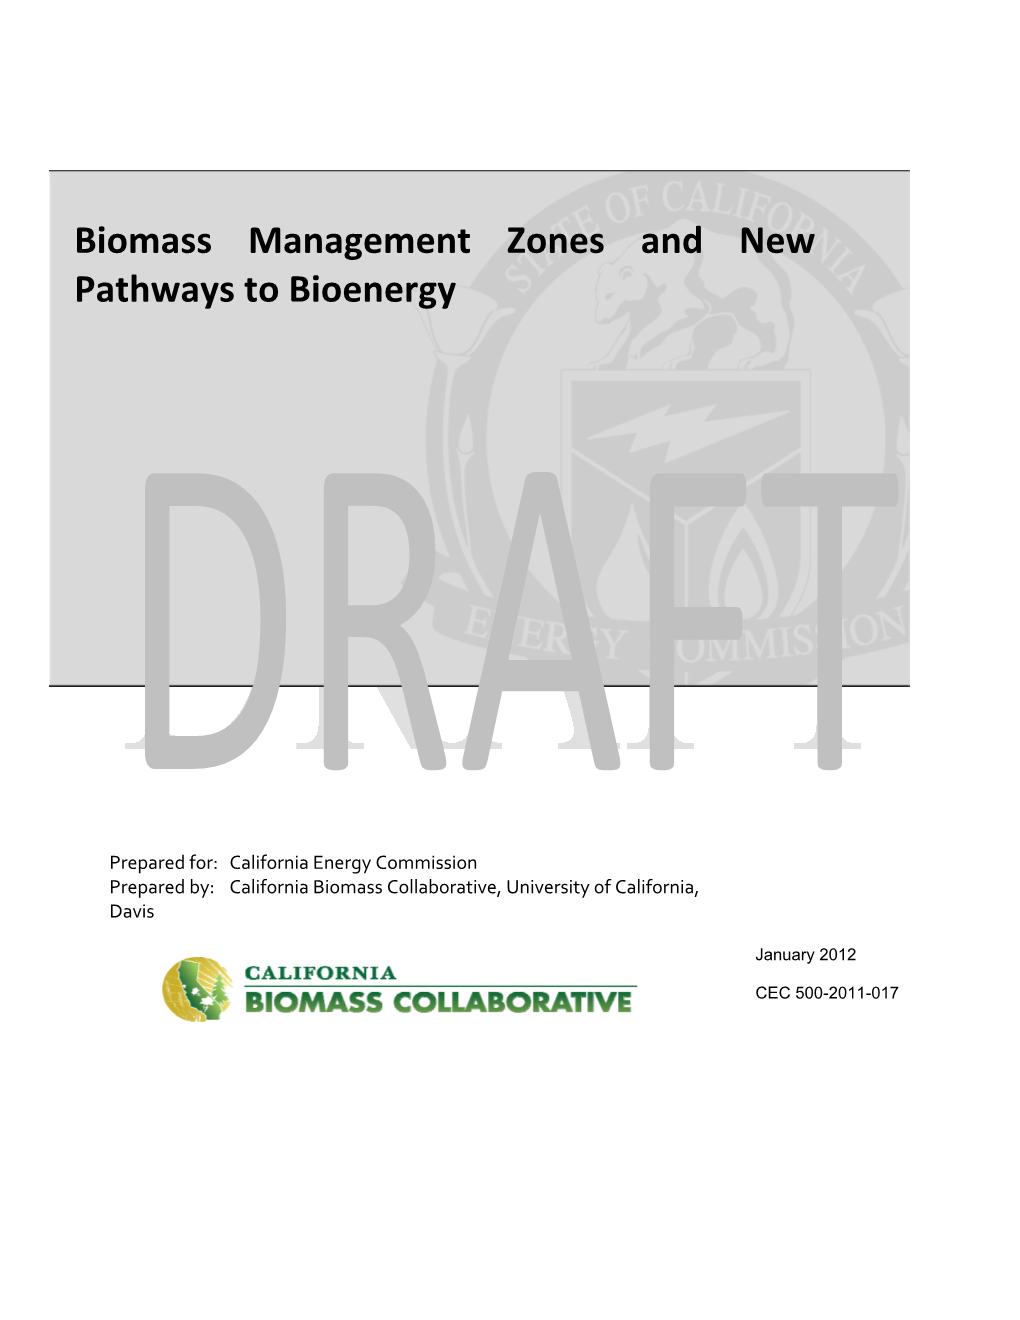 Biomass Management Zones and New Pathways to Bioenergy Is the Final Report for Task 3.2.1.7 the Biomass Management Zones Project, Contract Number 500‐08‐017